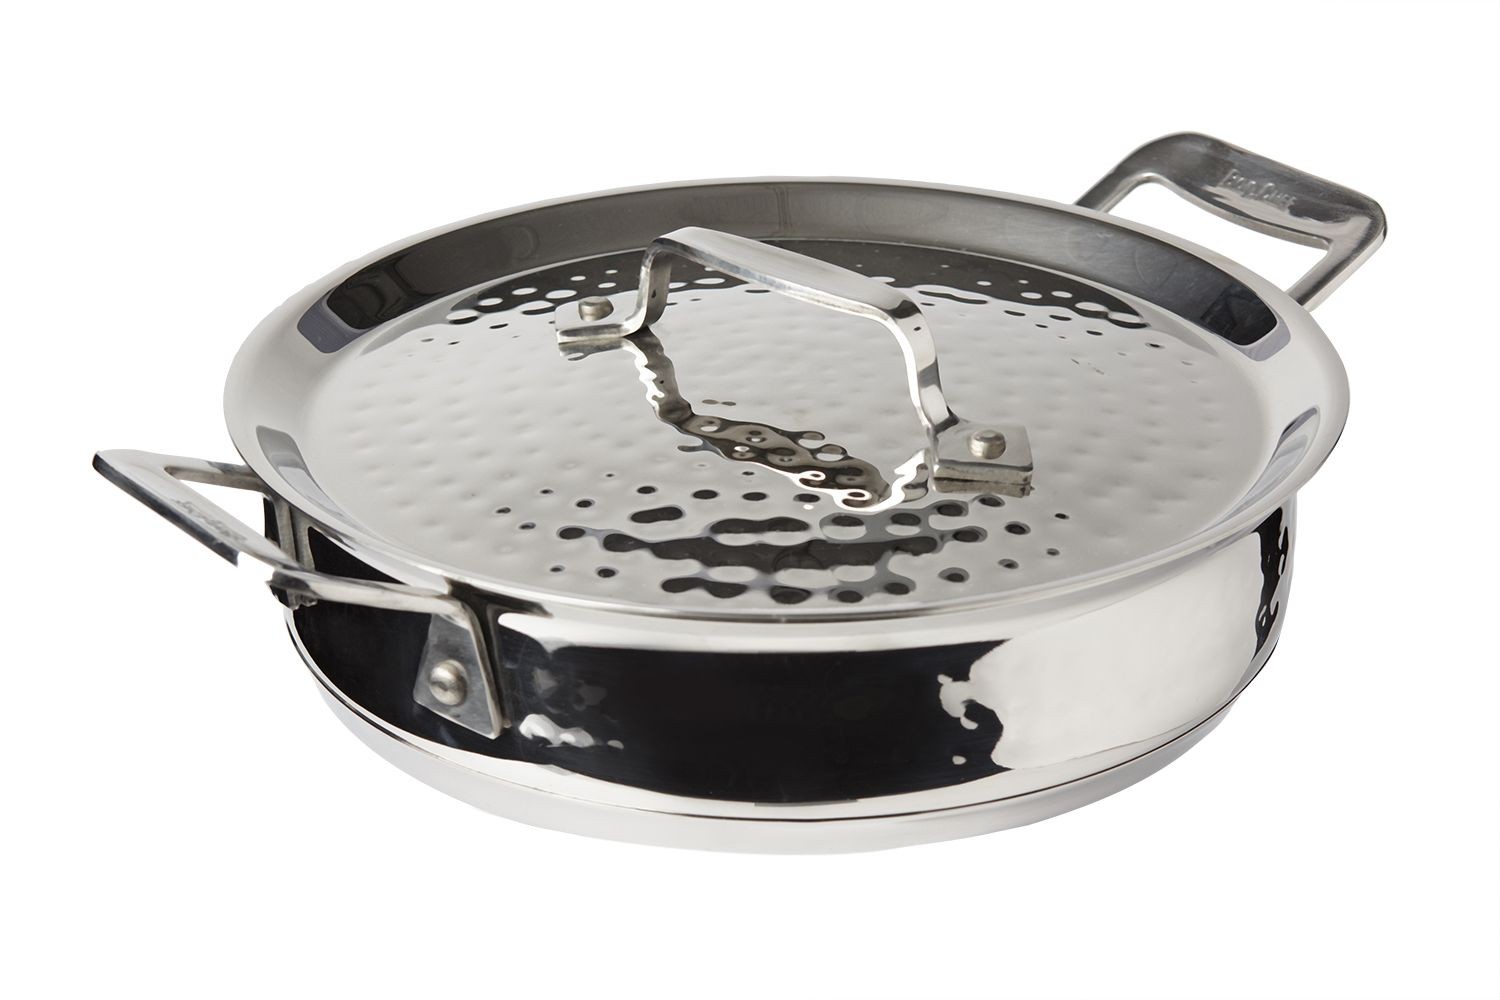 Bon Chef 60022HF Cucina Stainless Steel Round Casserole with Lid, Hammered Finish, 1 Qt. 24 oz.